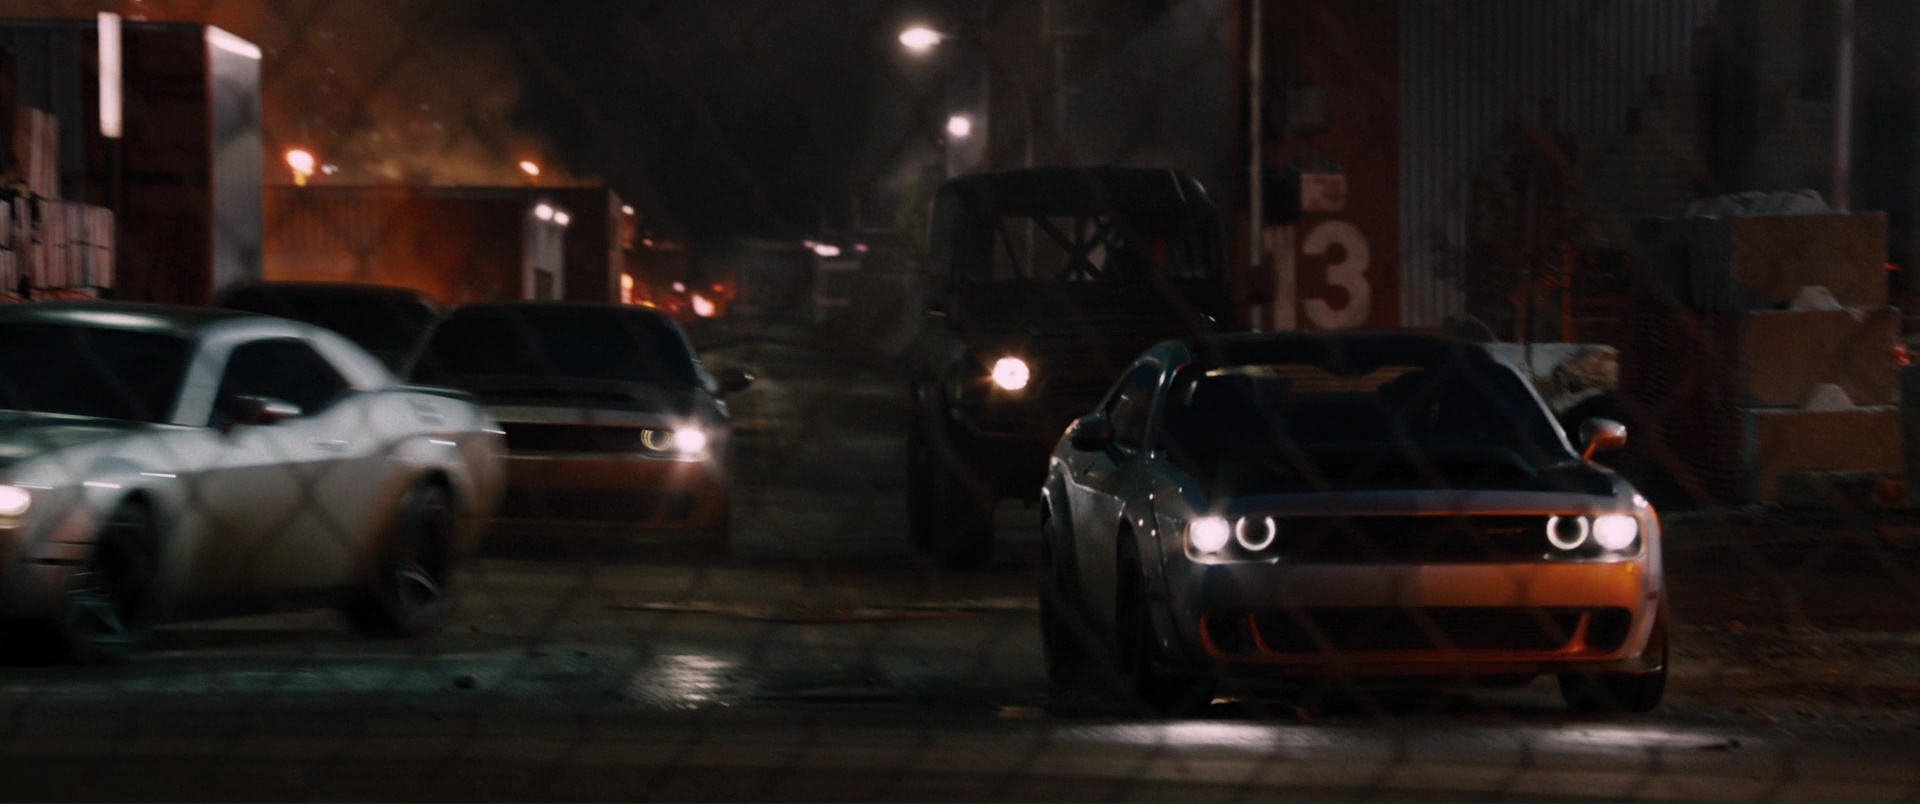 Dodge Challenger Cars in The Fate of the Furious (2017) Movie1920 x 804